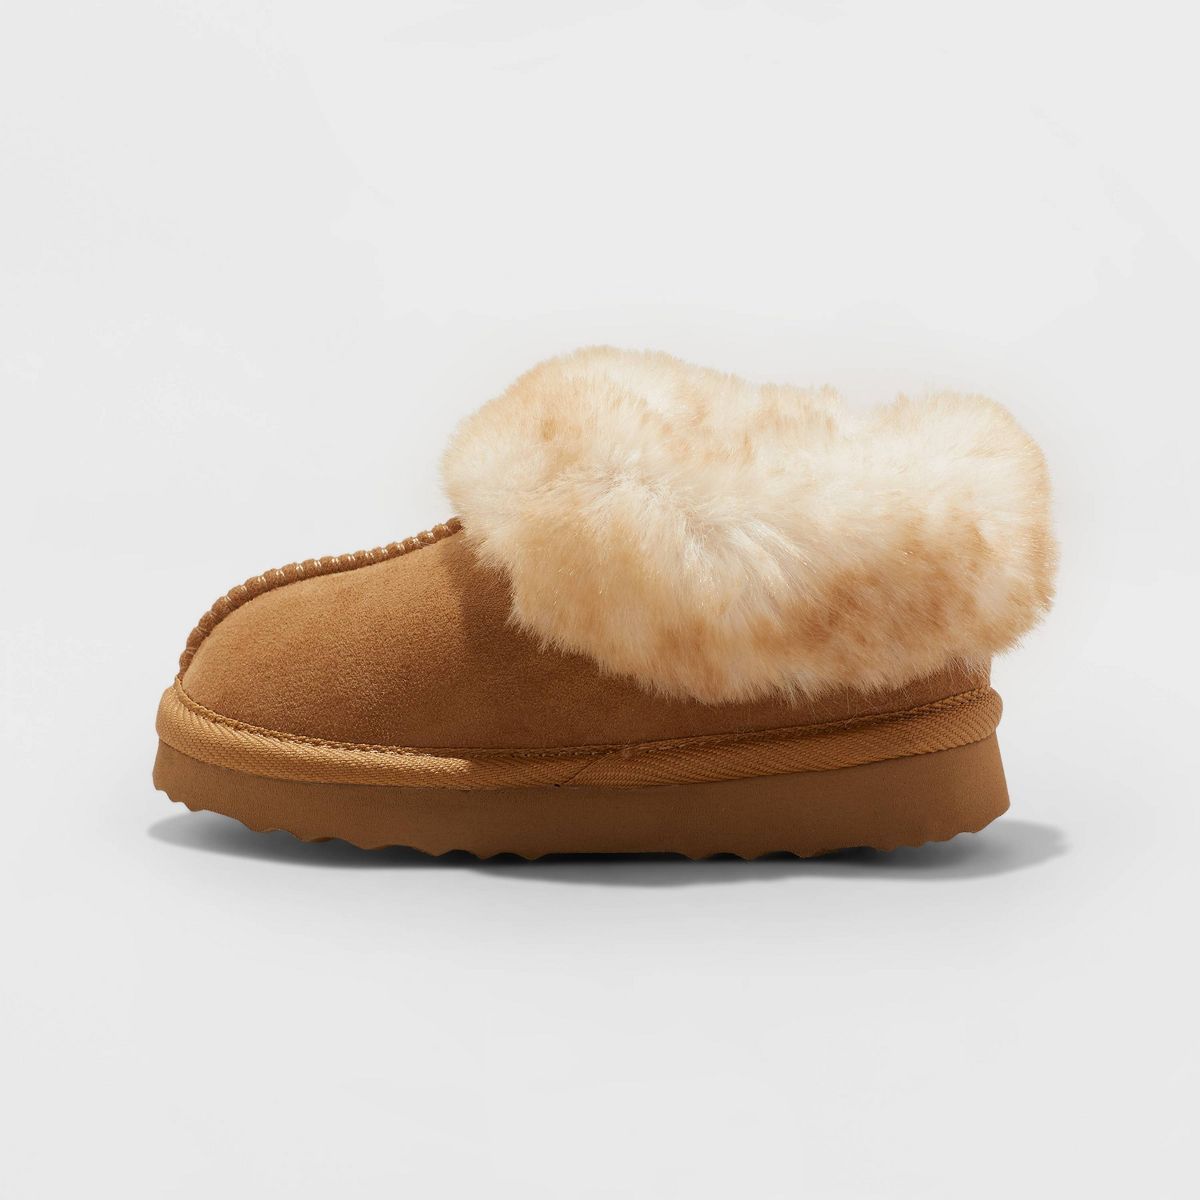 Toddler Callie Faux Fur Cuff Bootie Slippers - Cat & Jack™ | Target